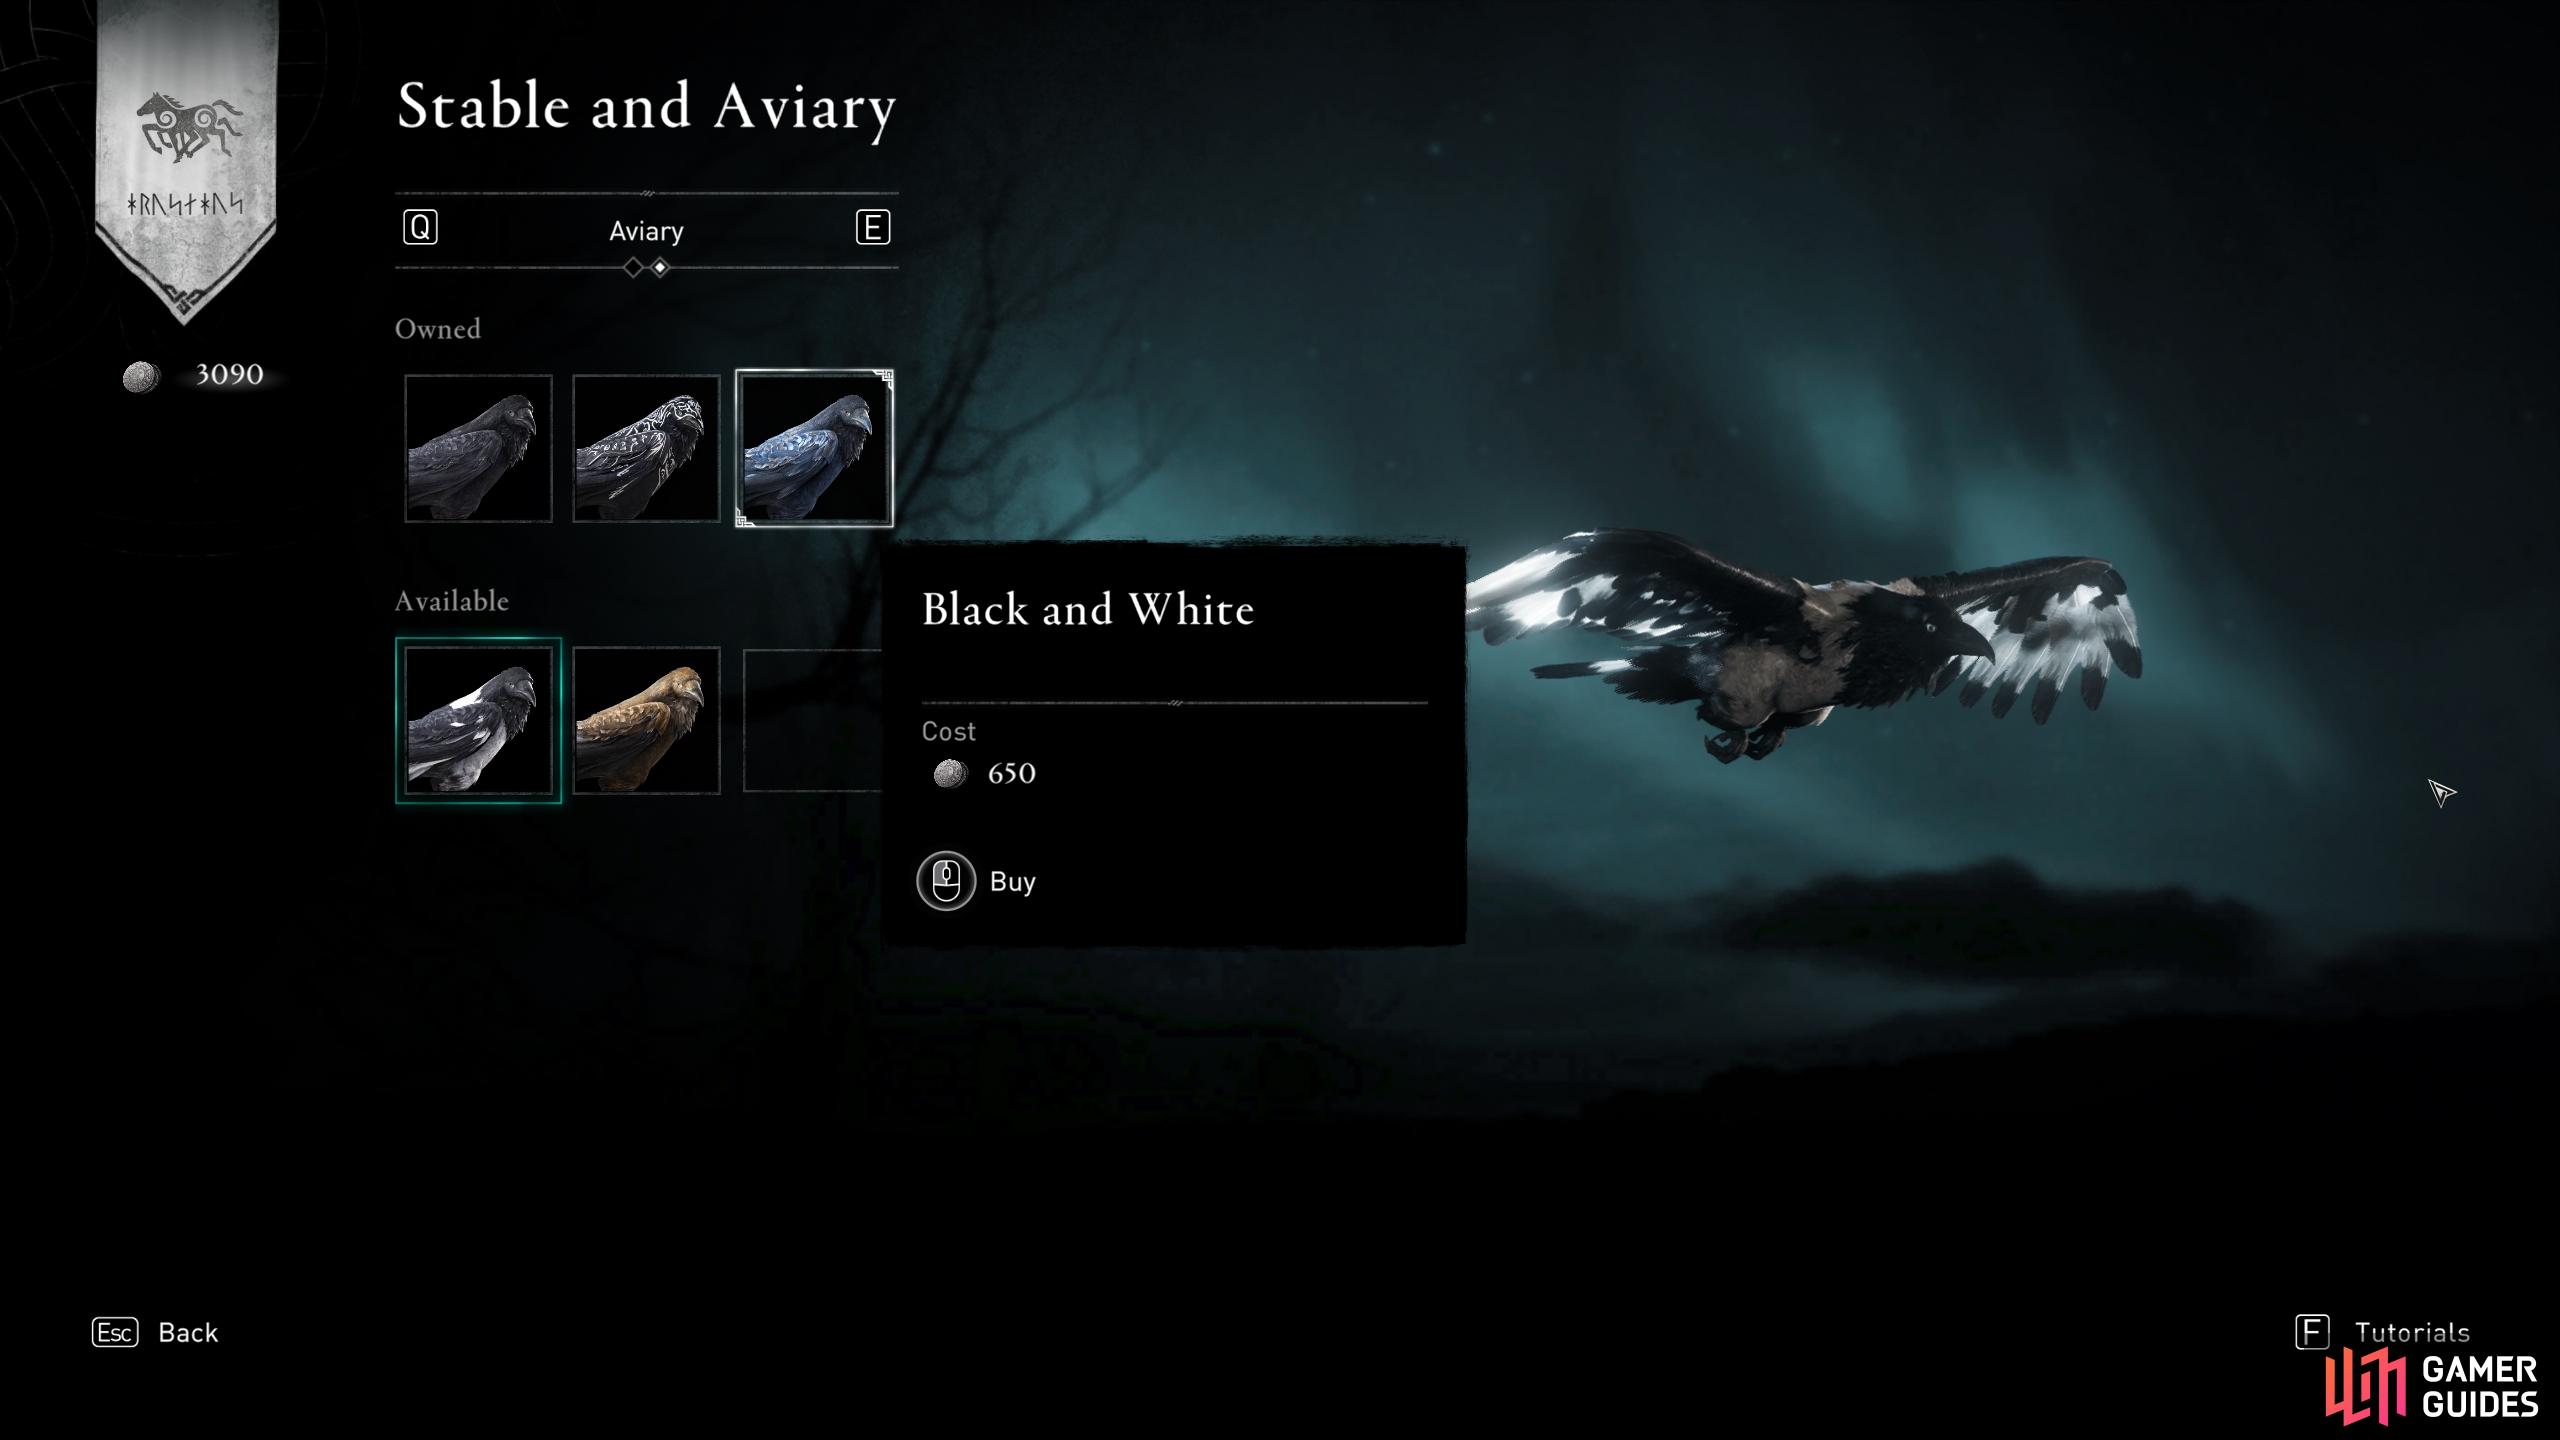 You can customize your raven and mount using the stable and aviary.